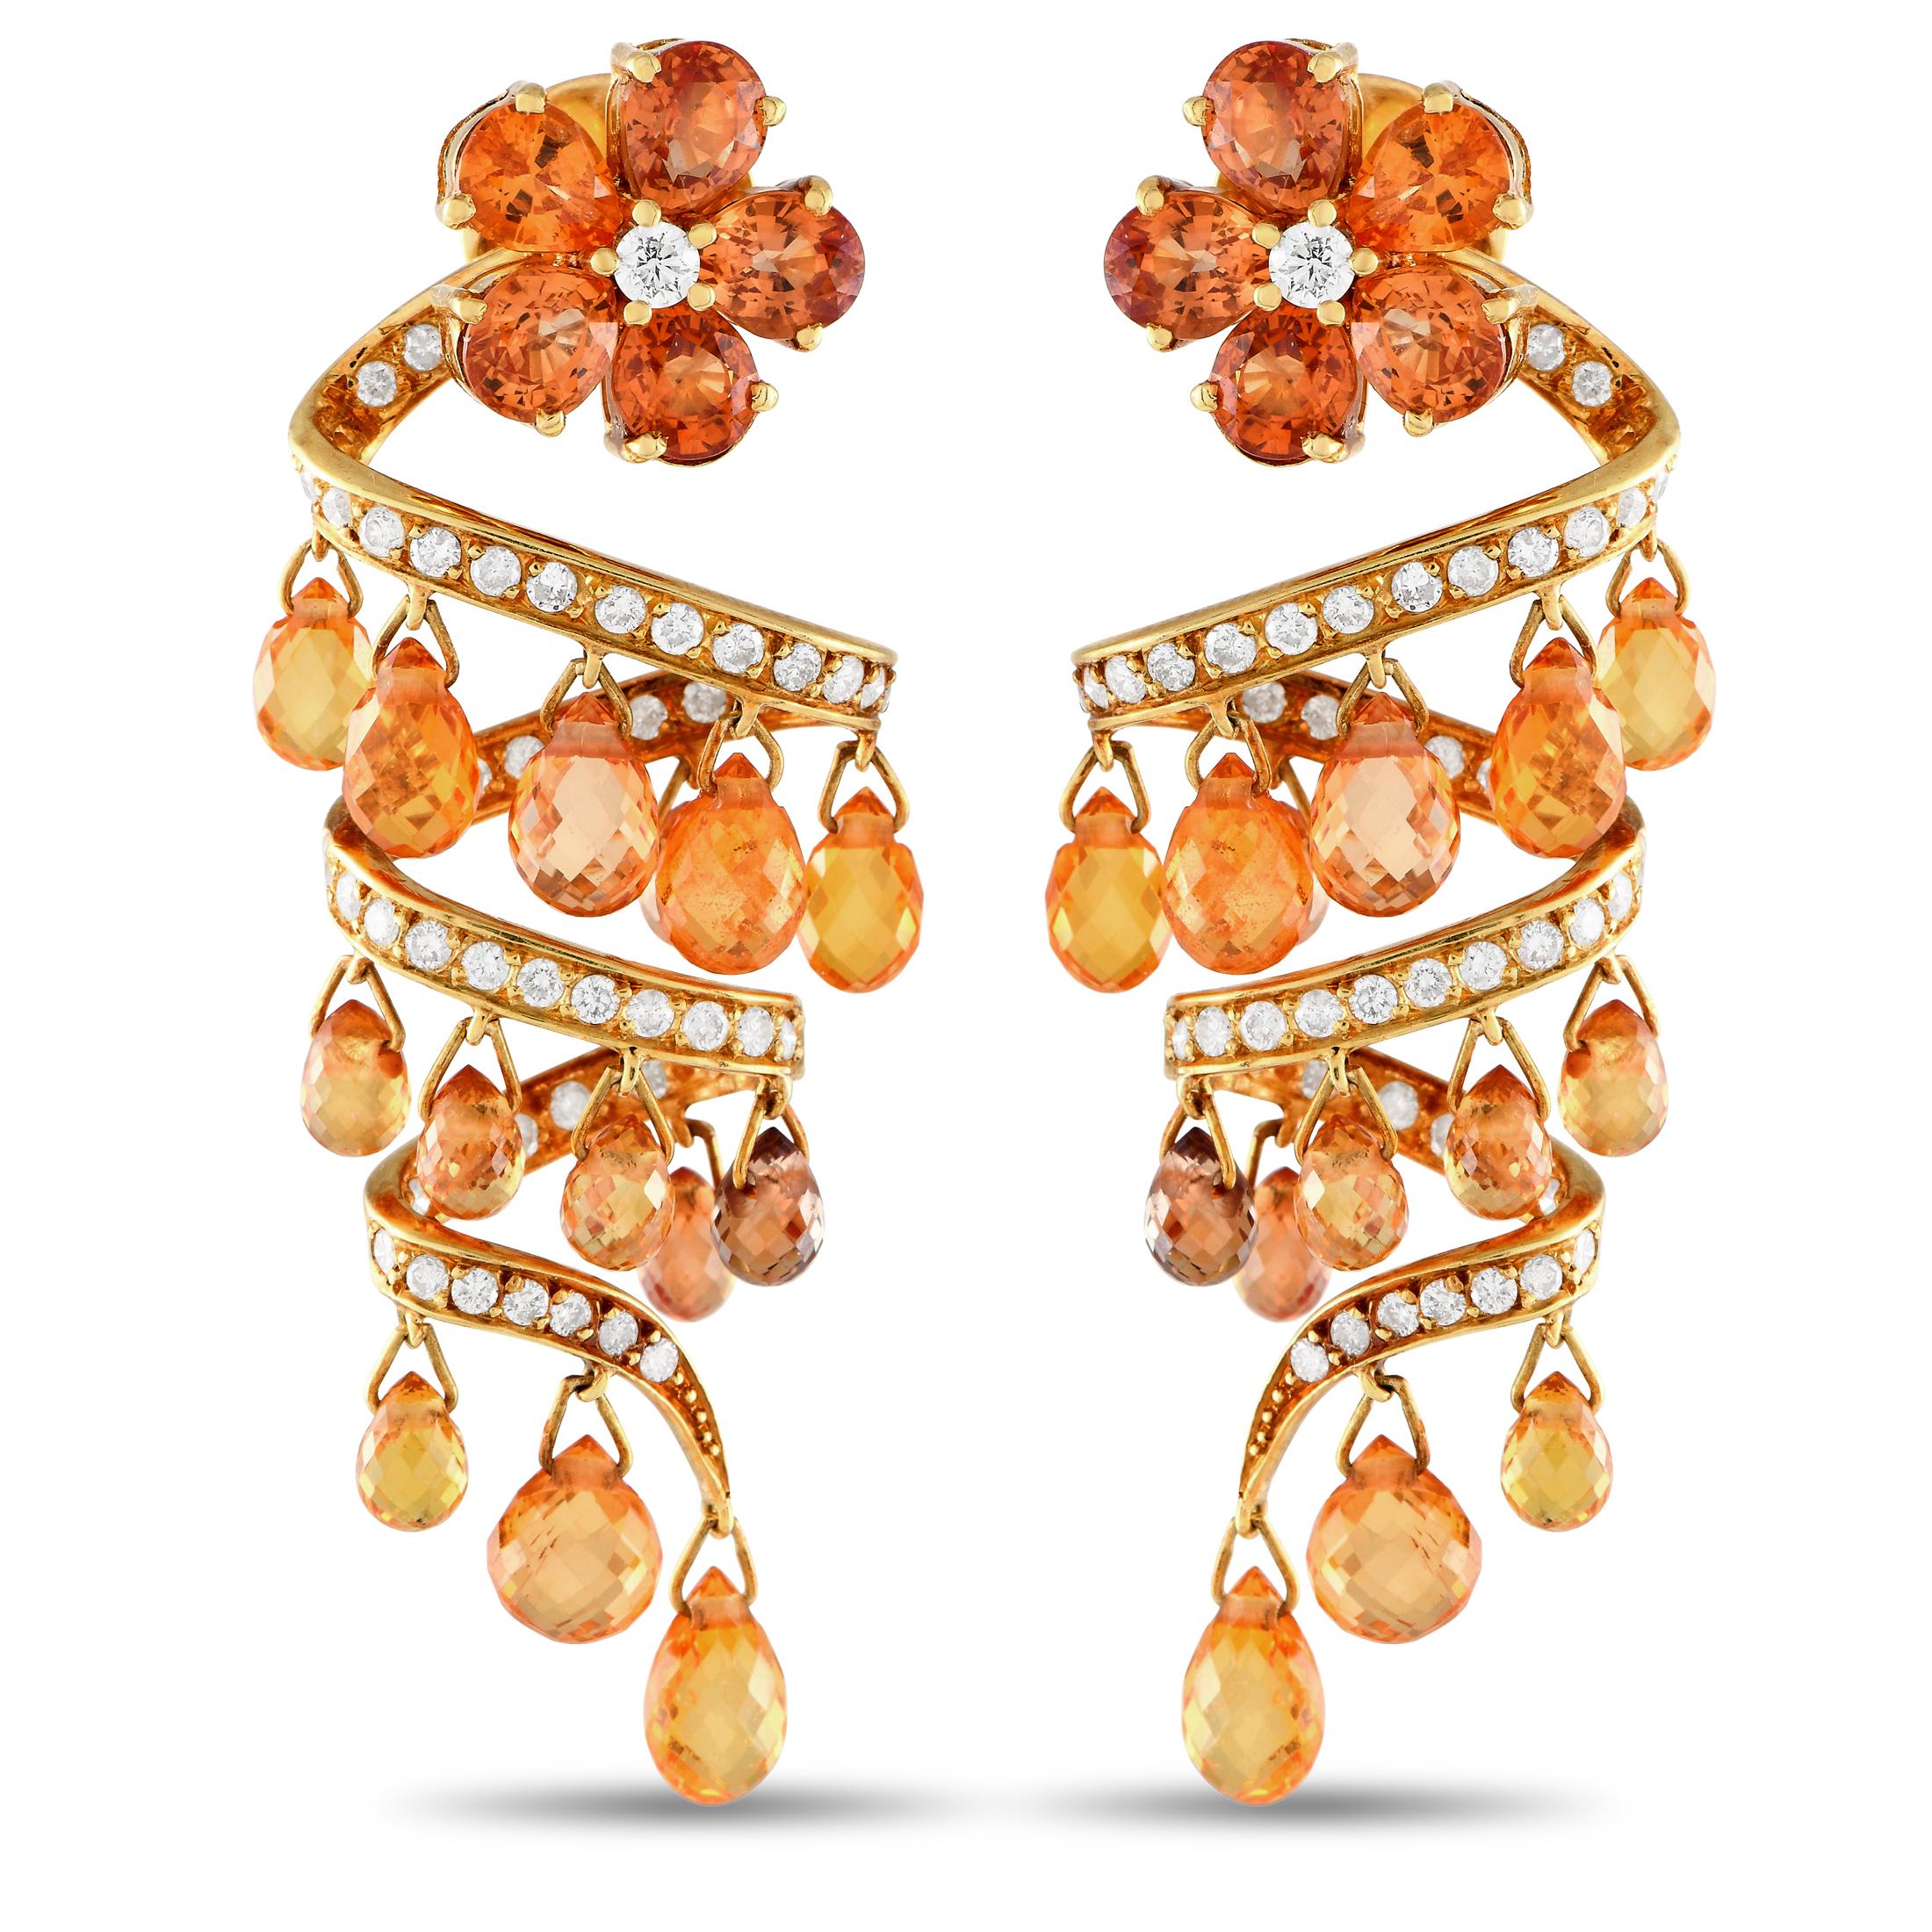 18K Yellow Gold 1.40ct Diamond & Citrine Spiral Chandelier Earrings MF07-013024 In Excellent Condition For Sale In Southampton, PA